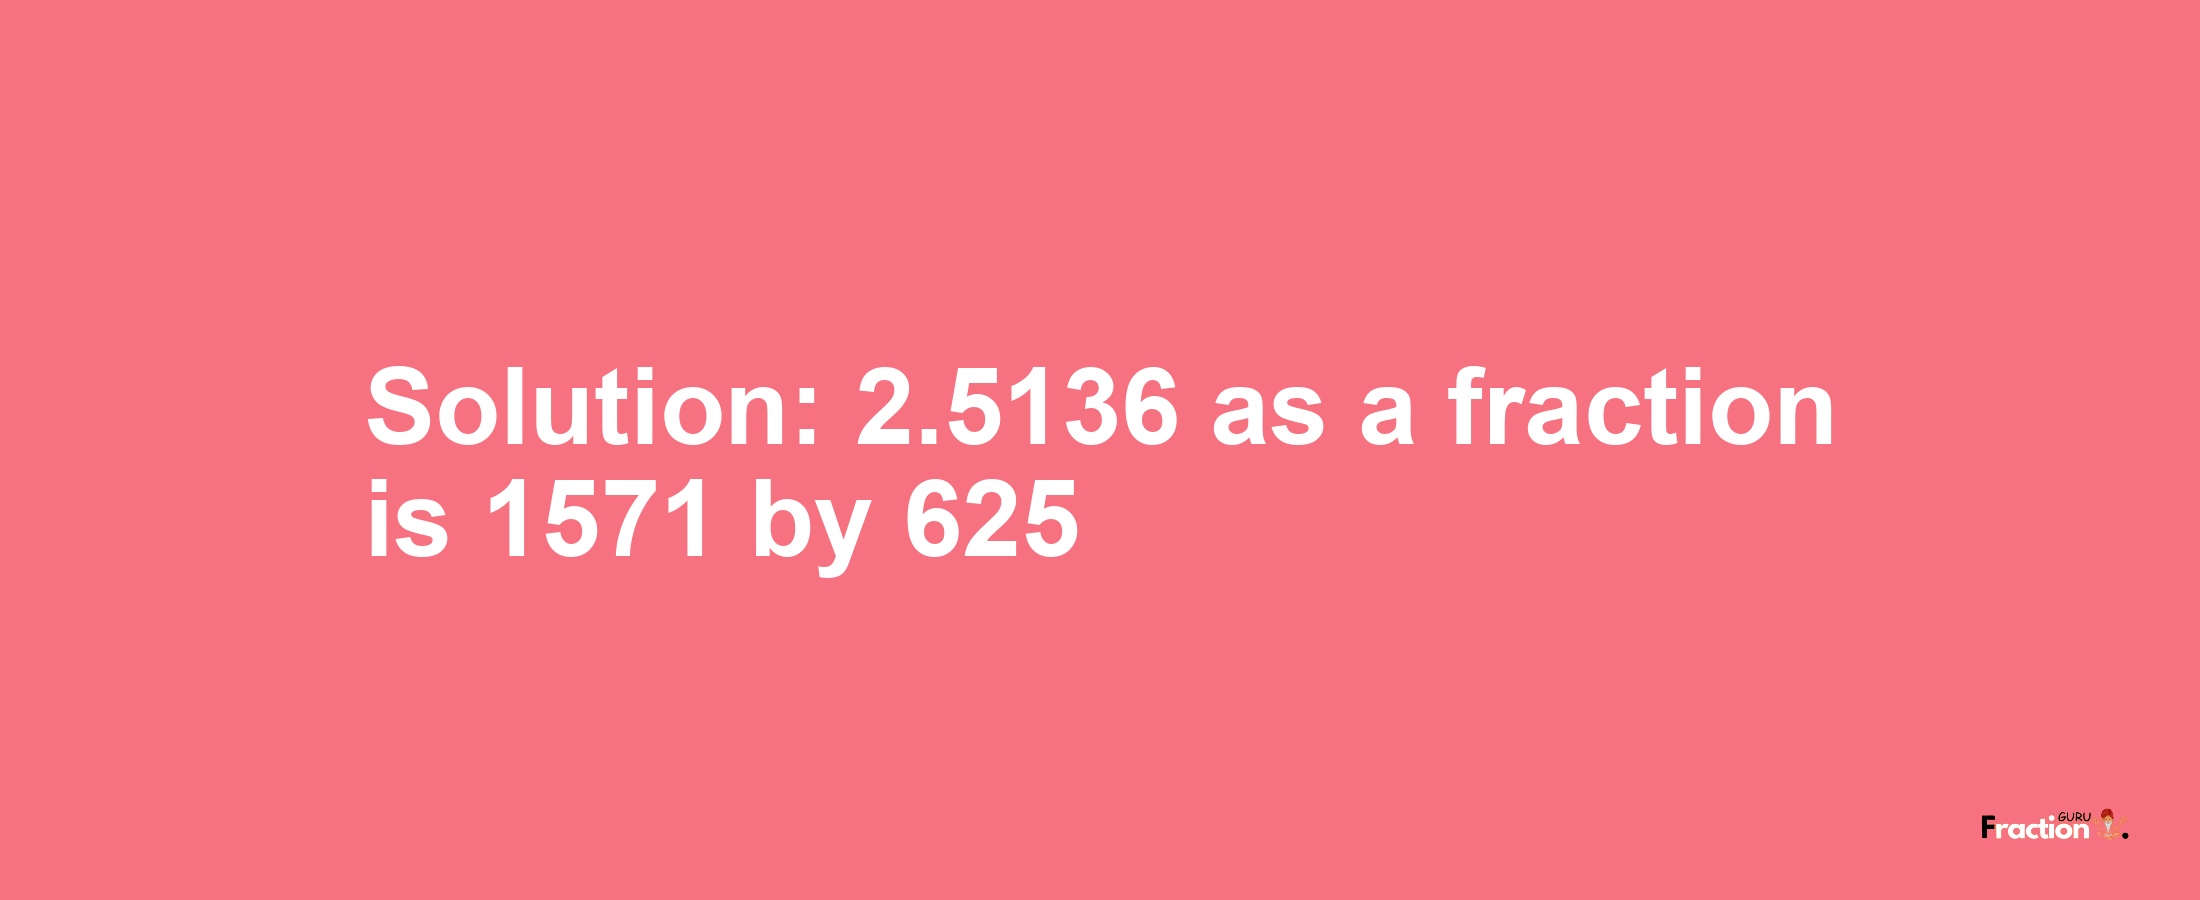 Solution:2.5136 as a fraction is 1571/625